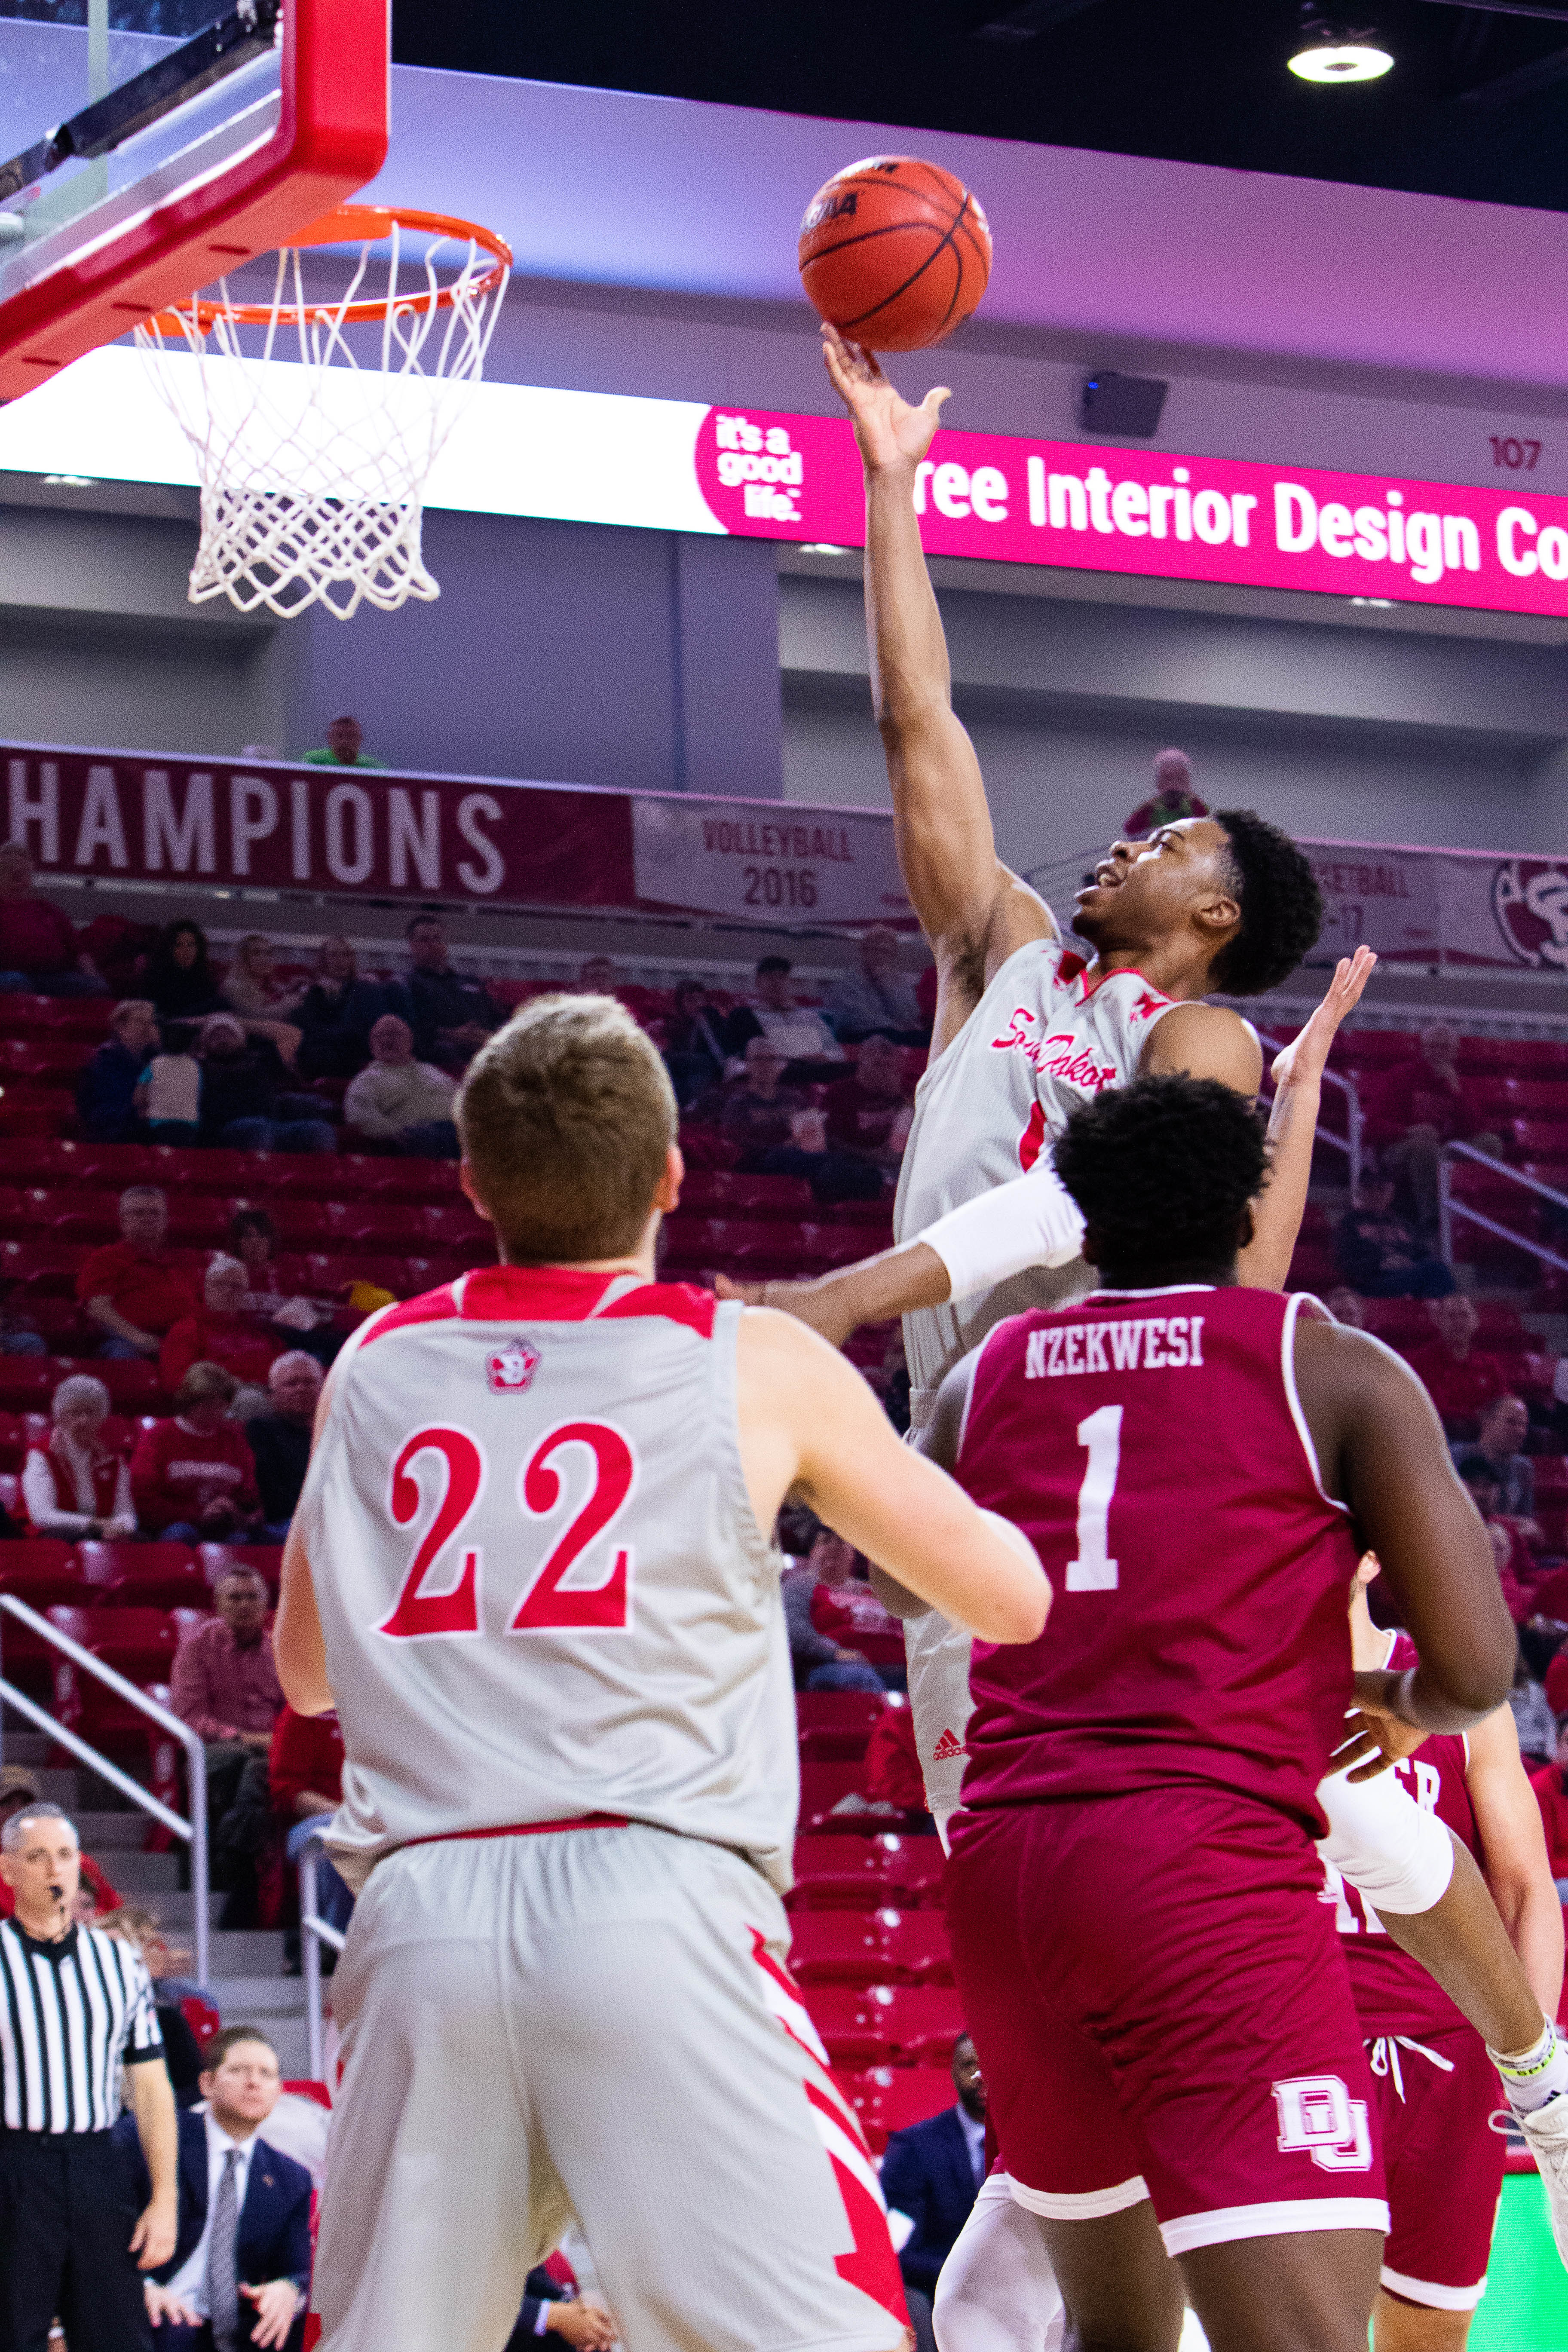 USD clinches tournament spot with win over Denver